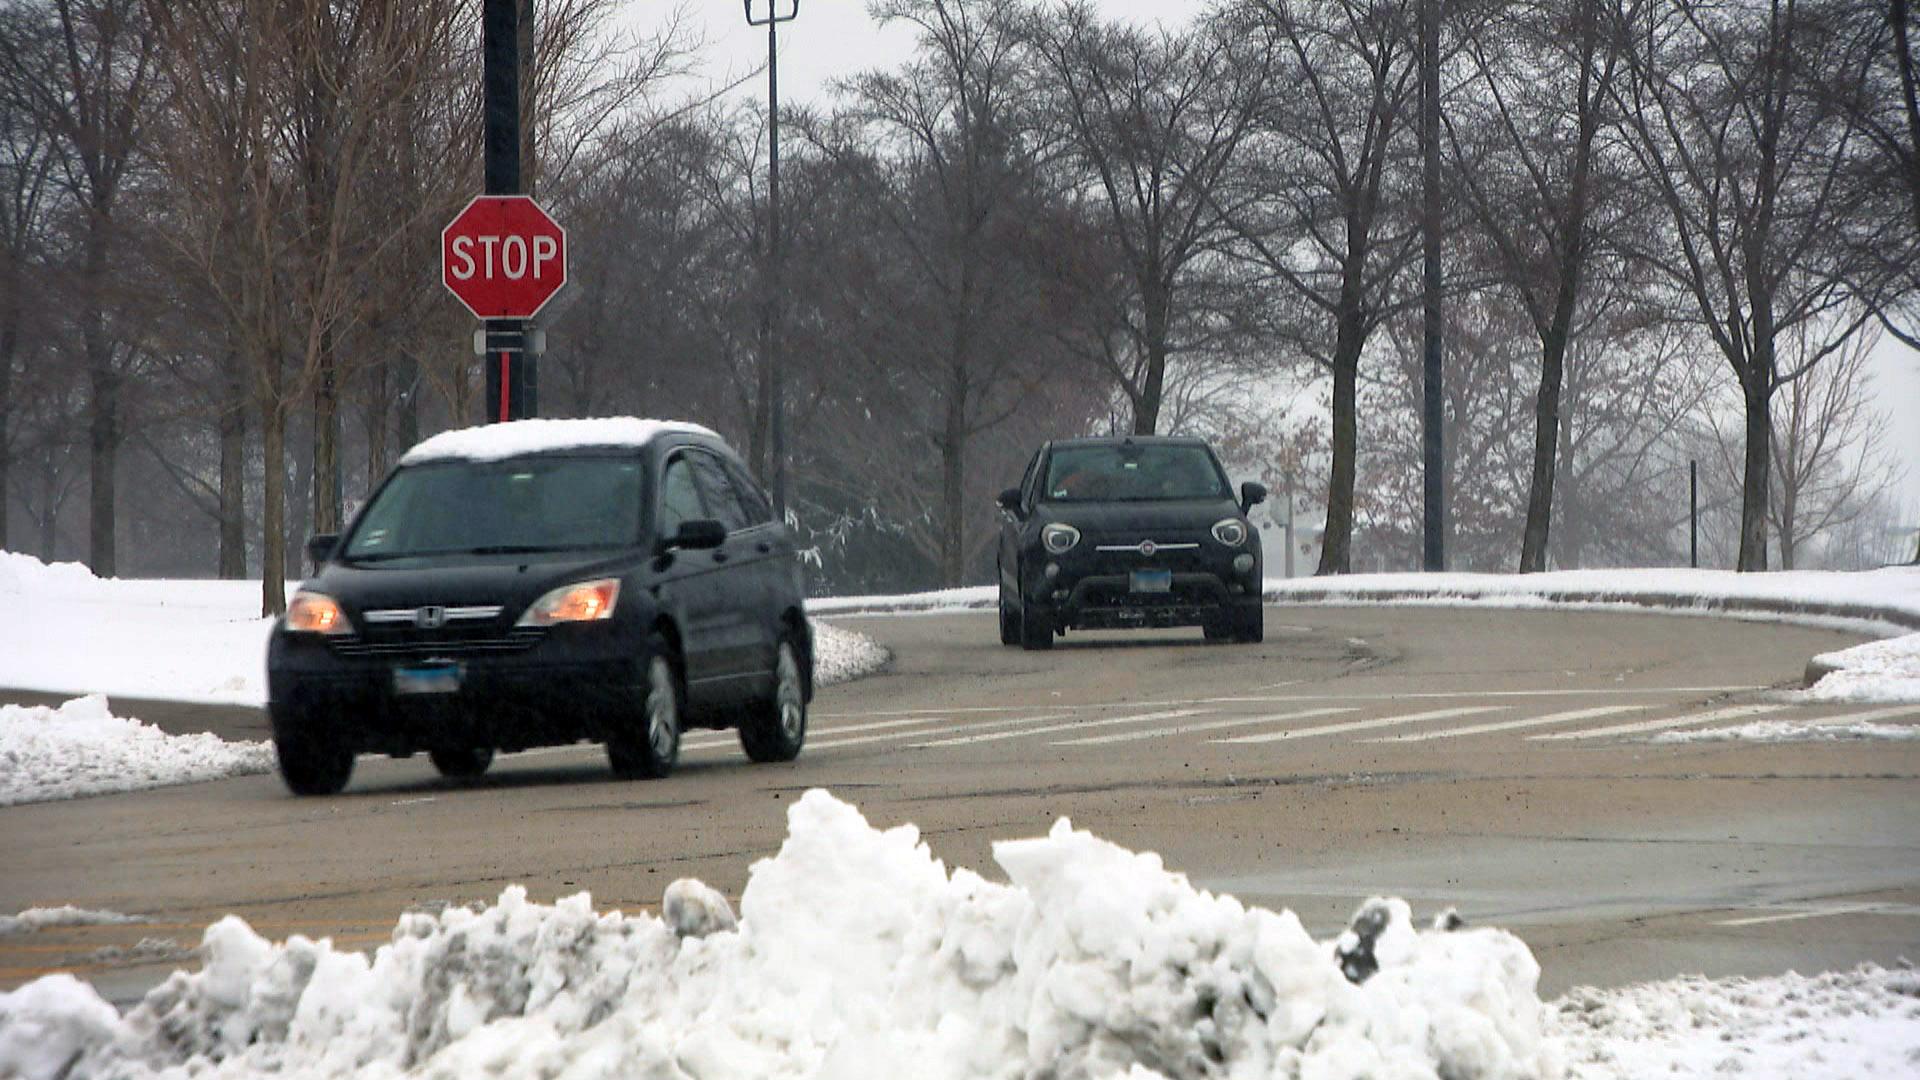 Cars drive on cleared roads in Chicago on Tuesday, Jan. 26, 2021 after the season’s first big snowfall. The city is gearing up for another major storm on Saturday, Jan. 30. (WTTW News)